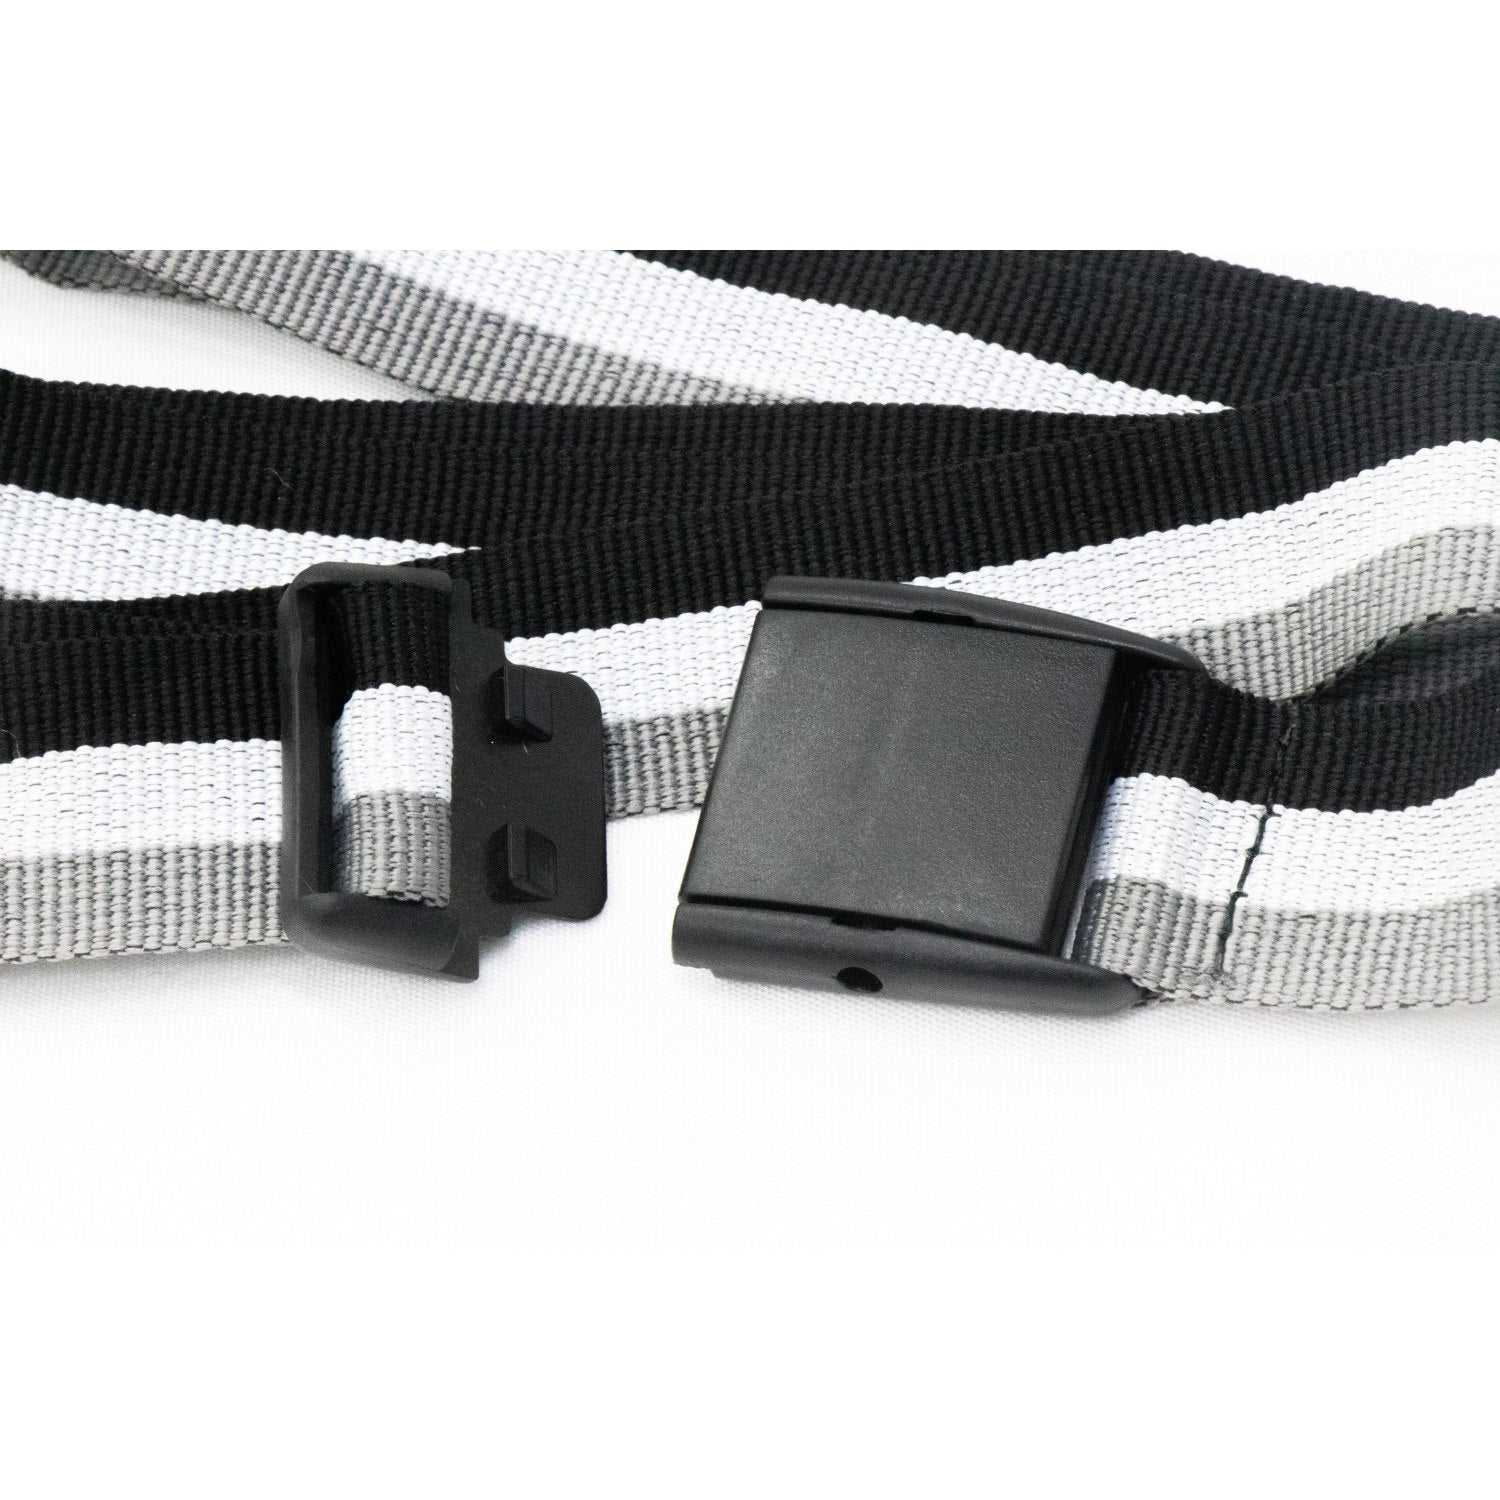 Buy Gokyo Belt for Hiking Trousers Grey | Belt at Gokyo Outdoor Clothing & Gear